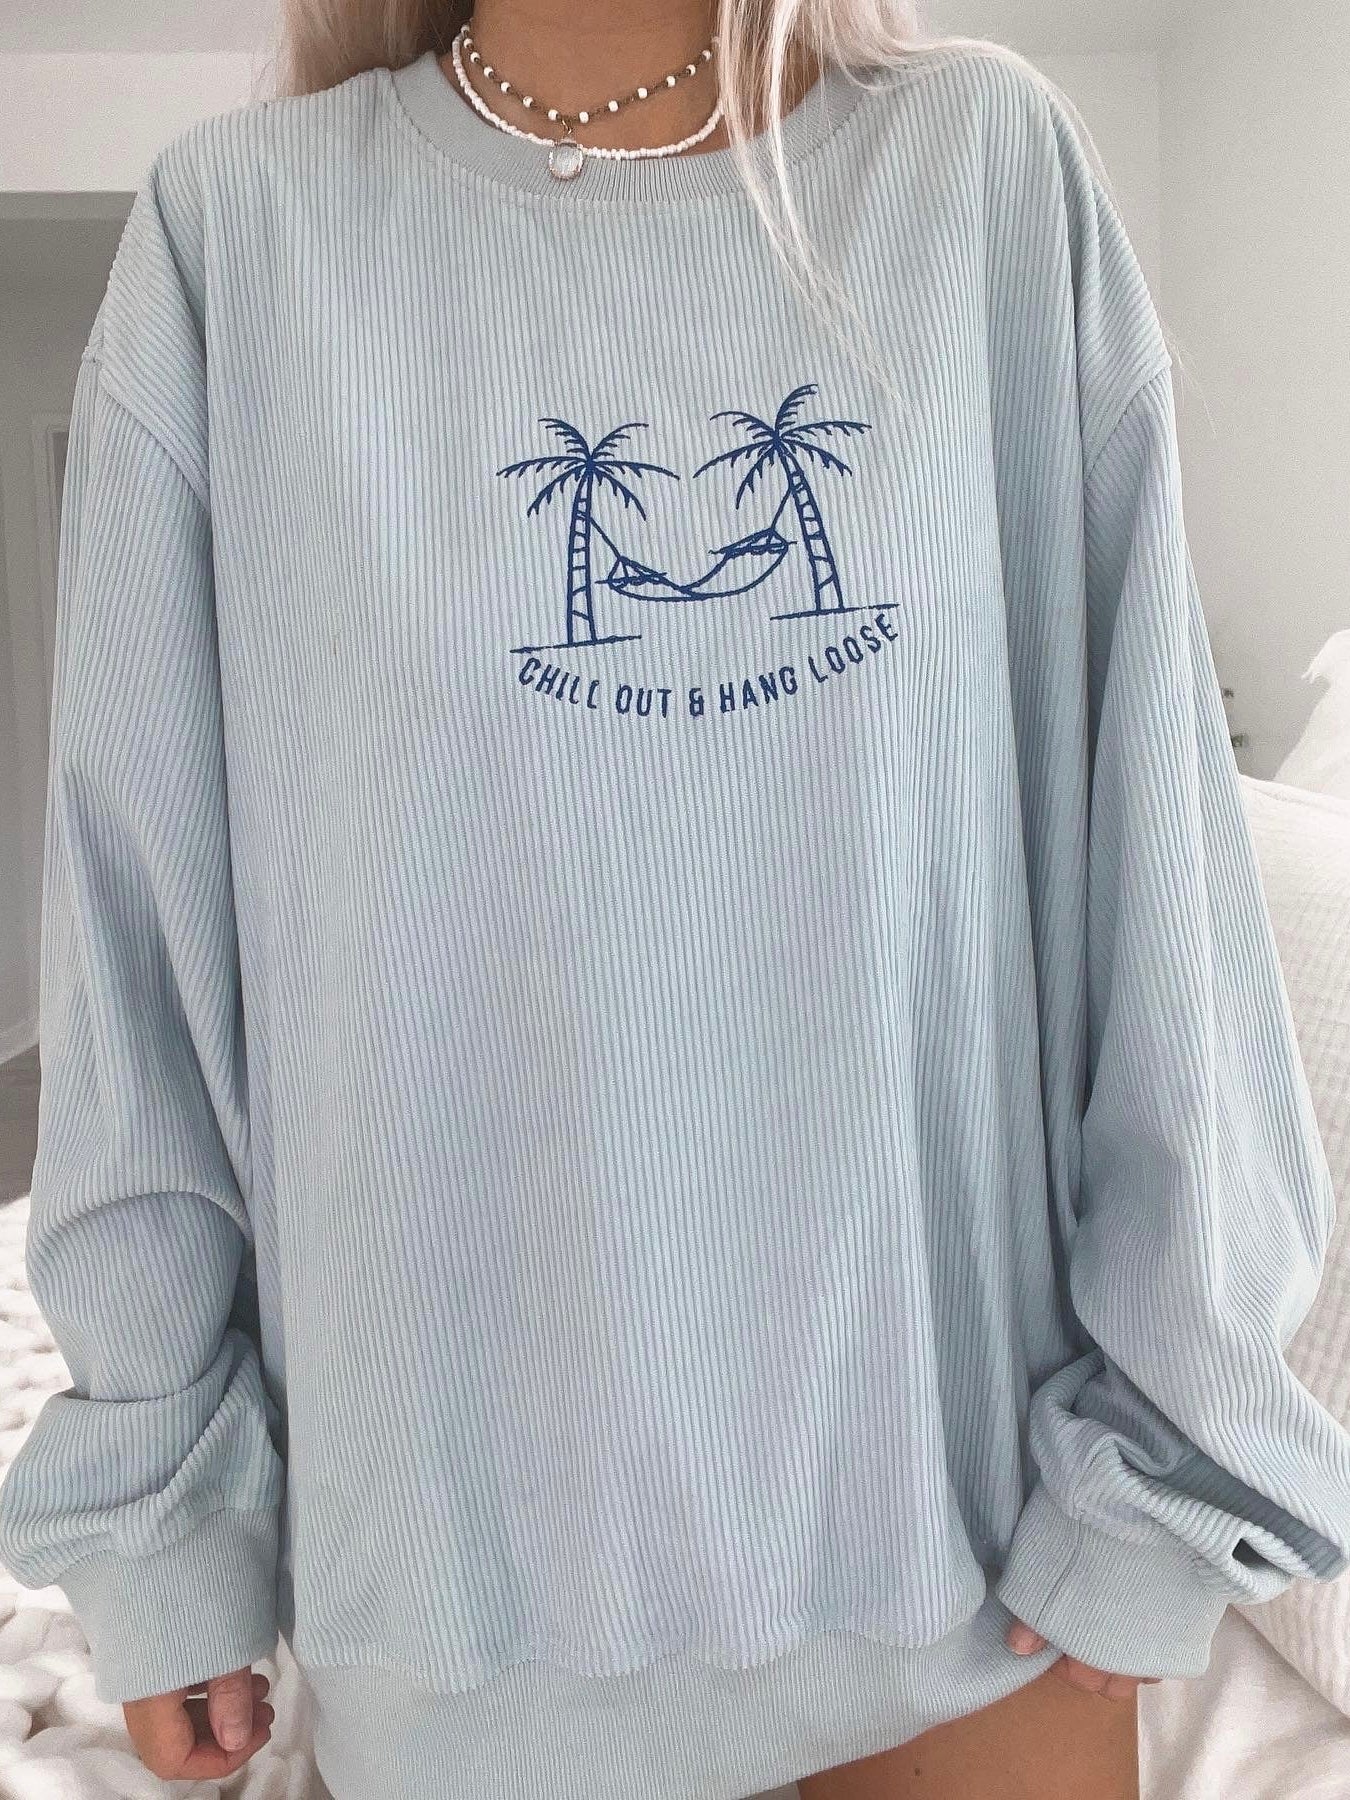 Chill Out and Hang Loose Corduroy Crewneck - Sunkissedcoconut